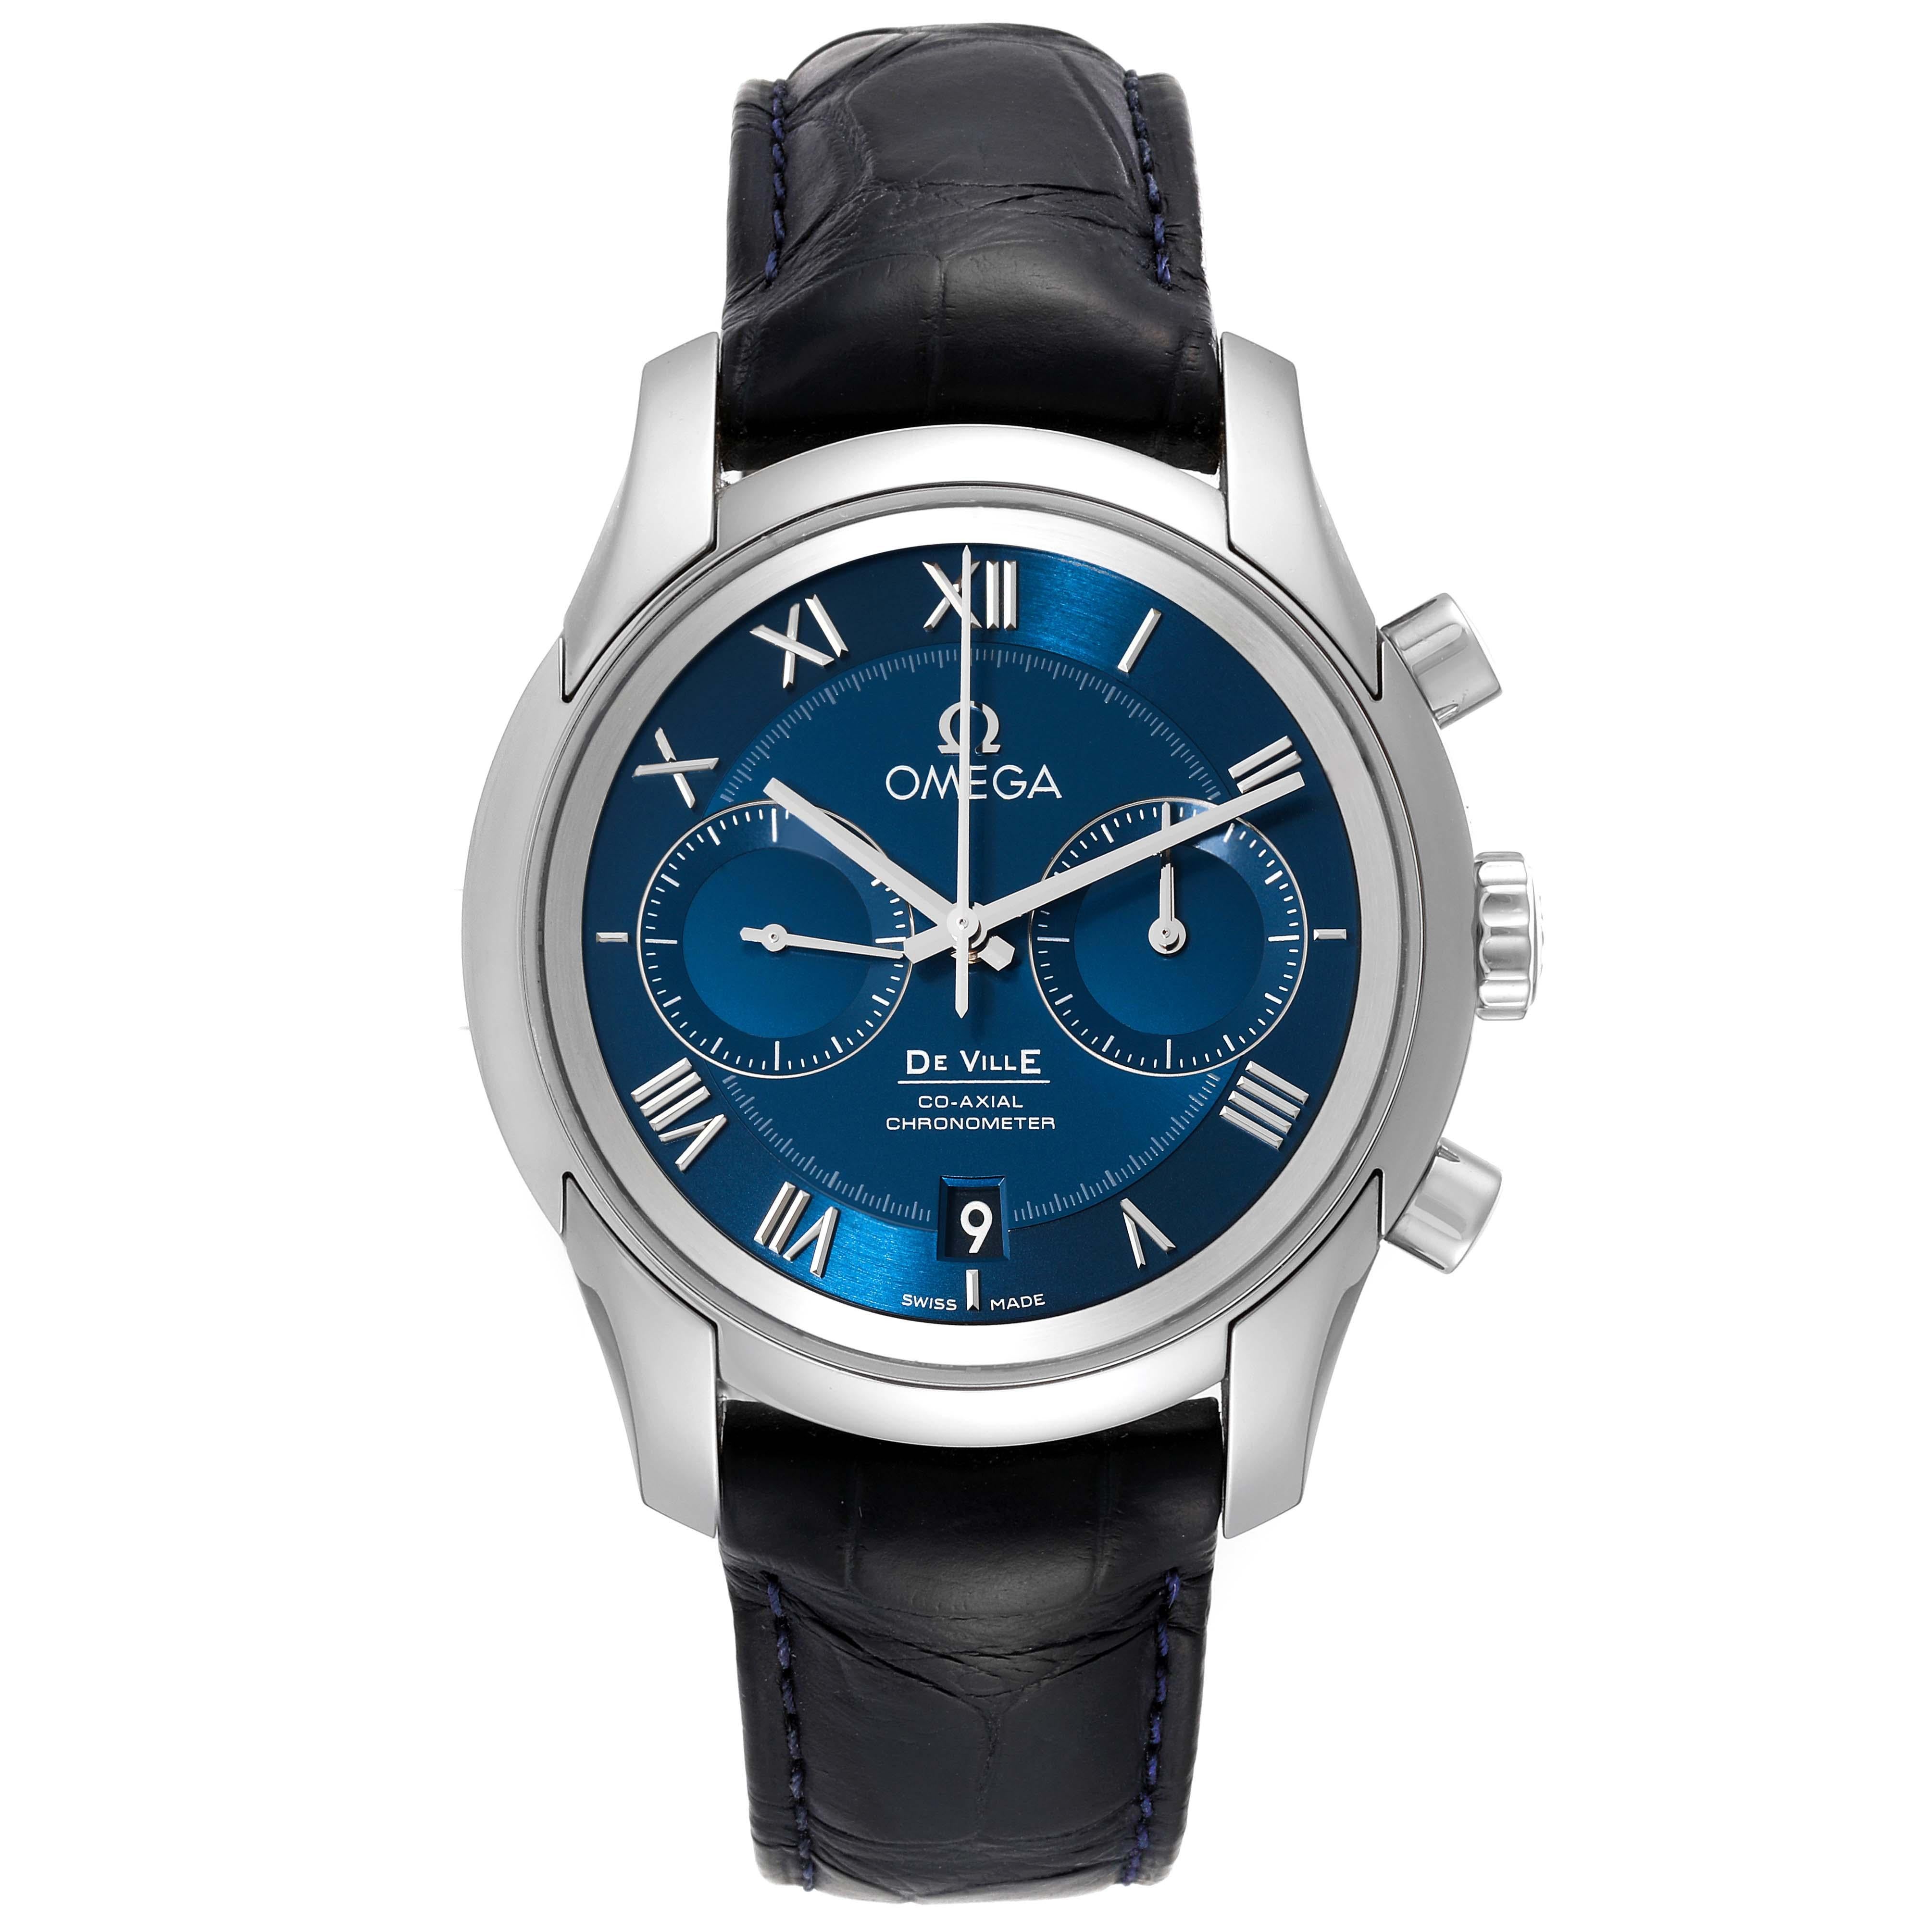 Omega DeVille 42 Blue Dial Steel Mens Watch 431.13.42.51.03.001 Box Card. Automatic self-winding chronograph movement with column wheel mechanism and Co-Axial escapement. Silicon balance-spring on free sprung-balance, 2 barrels mounted in series,